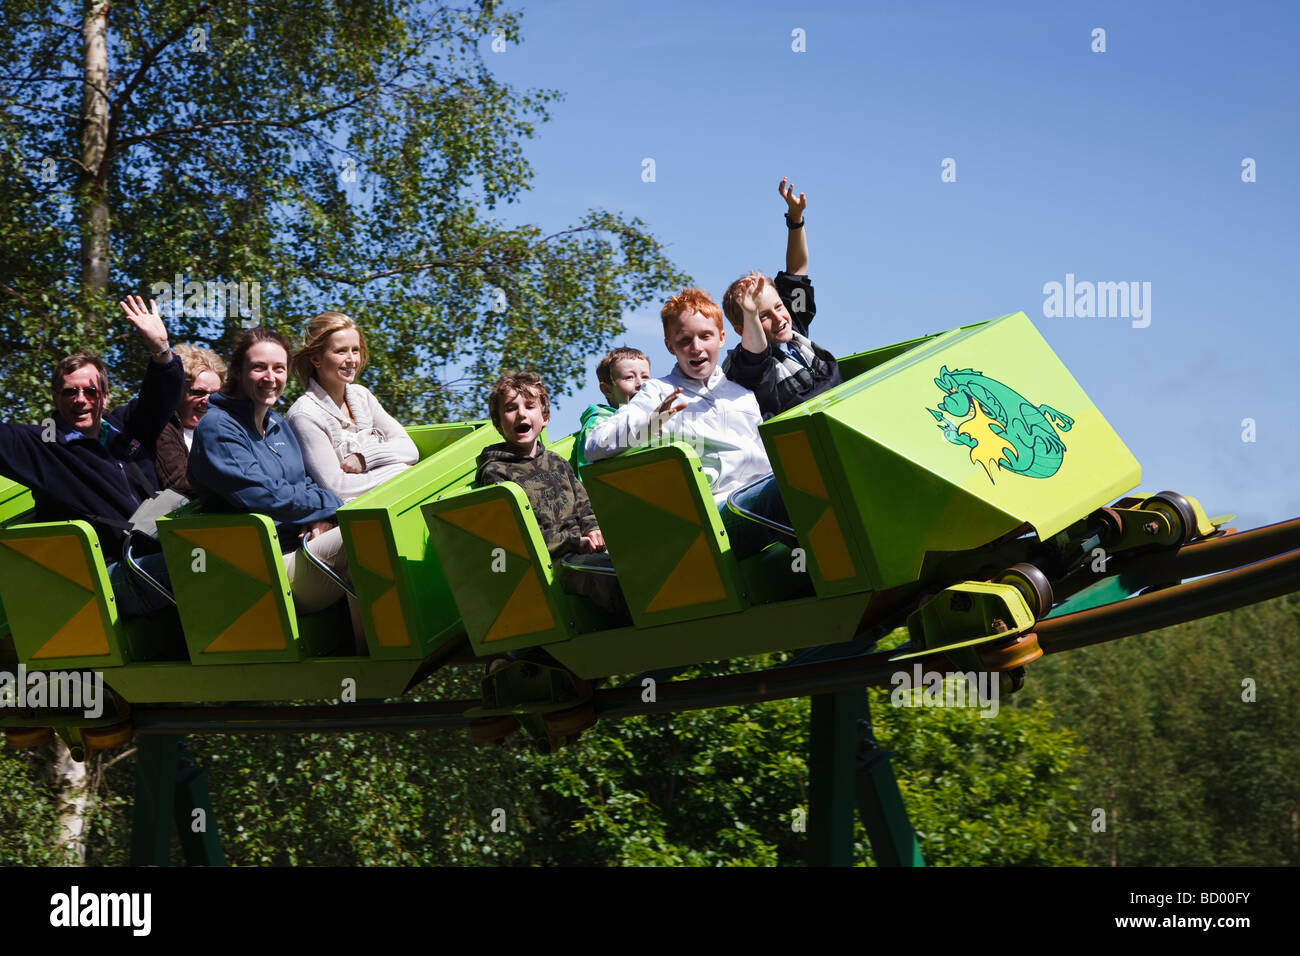 The Green Dragon rollercoaster at Greenwood Forest Park, Y Felinheli, Snowdonia, North Wales. Stock Photo